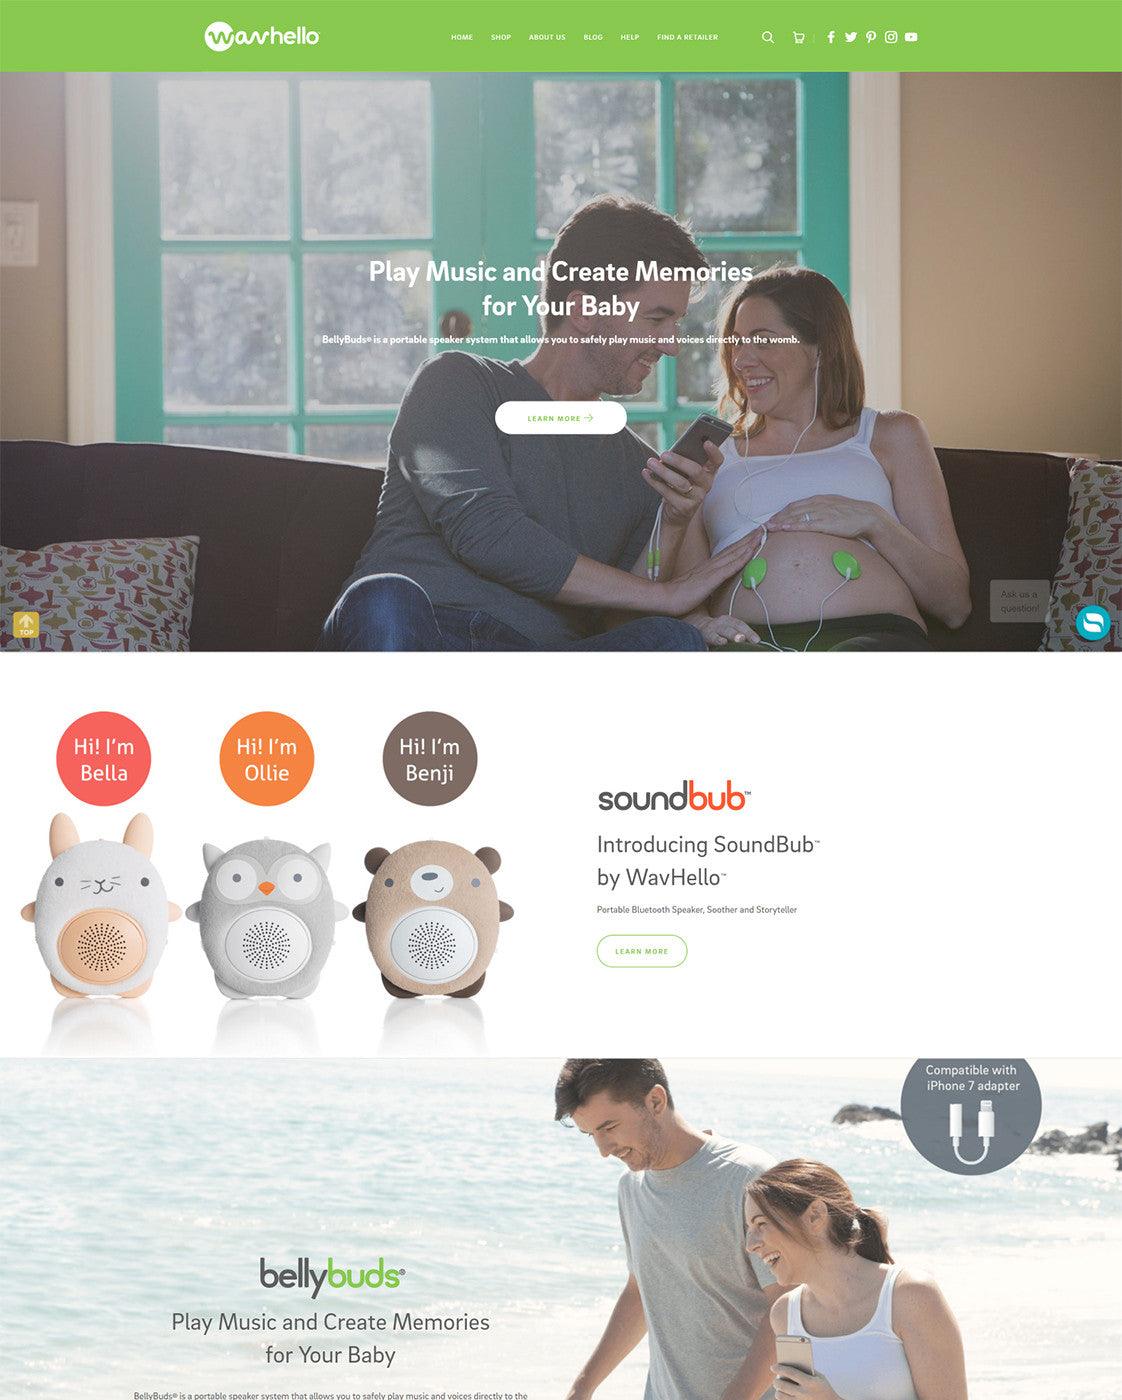 Wavhello - Photography and Web Design - Los Angeles, US based Shopify Experts Revo Designs